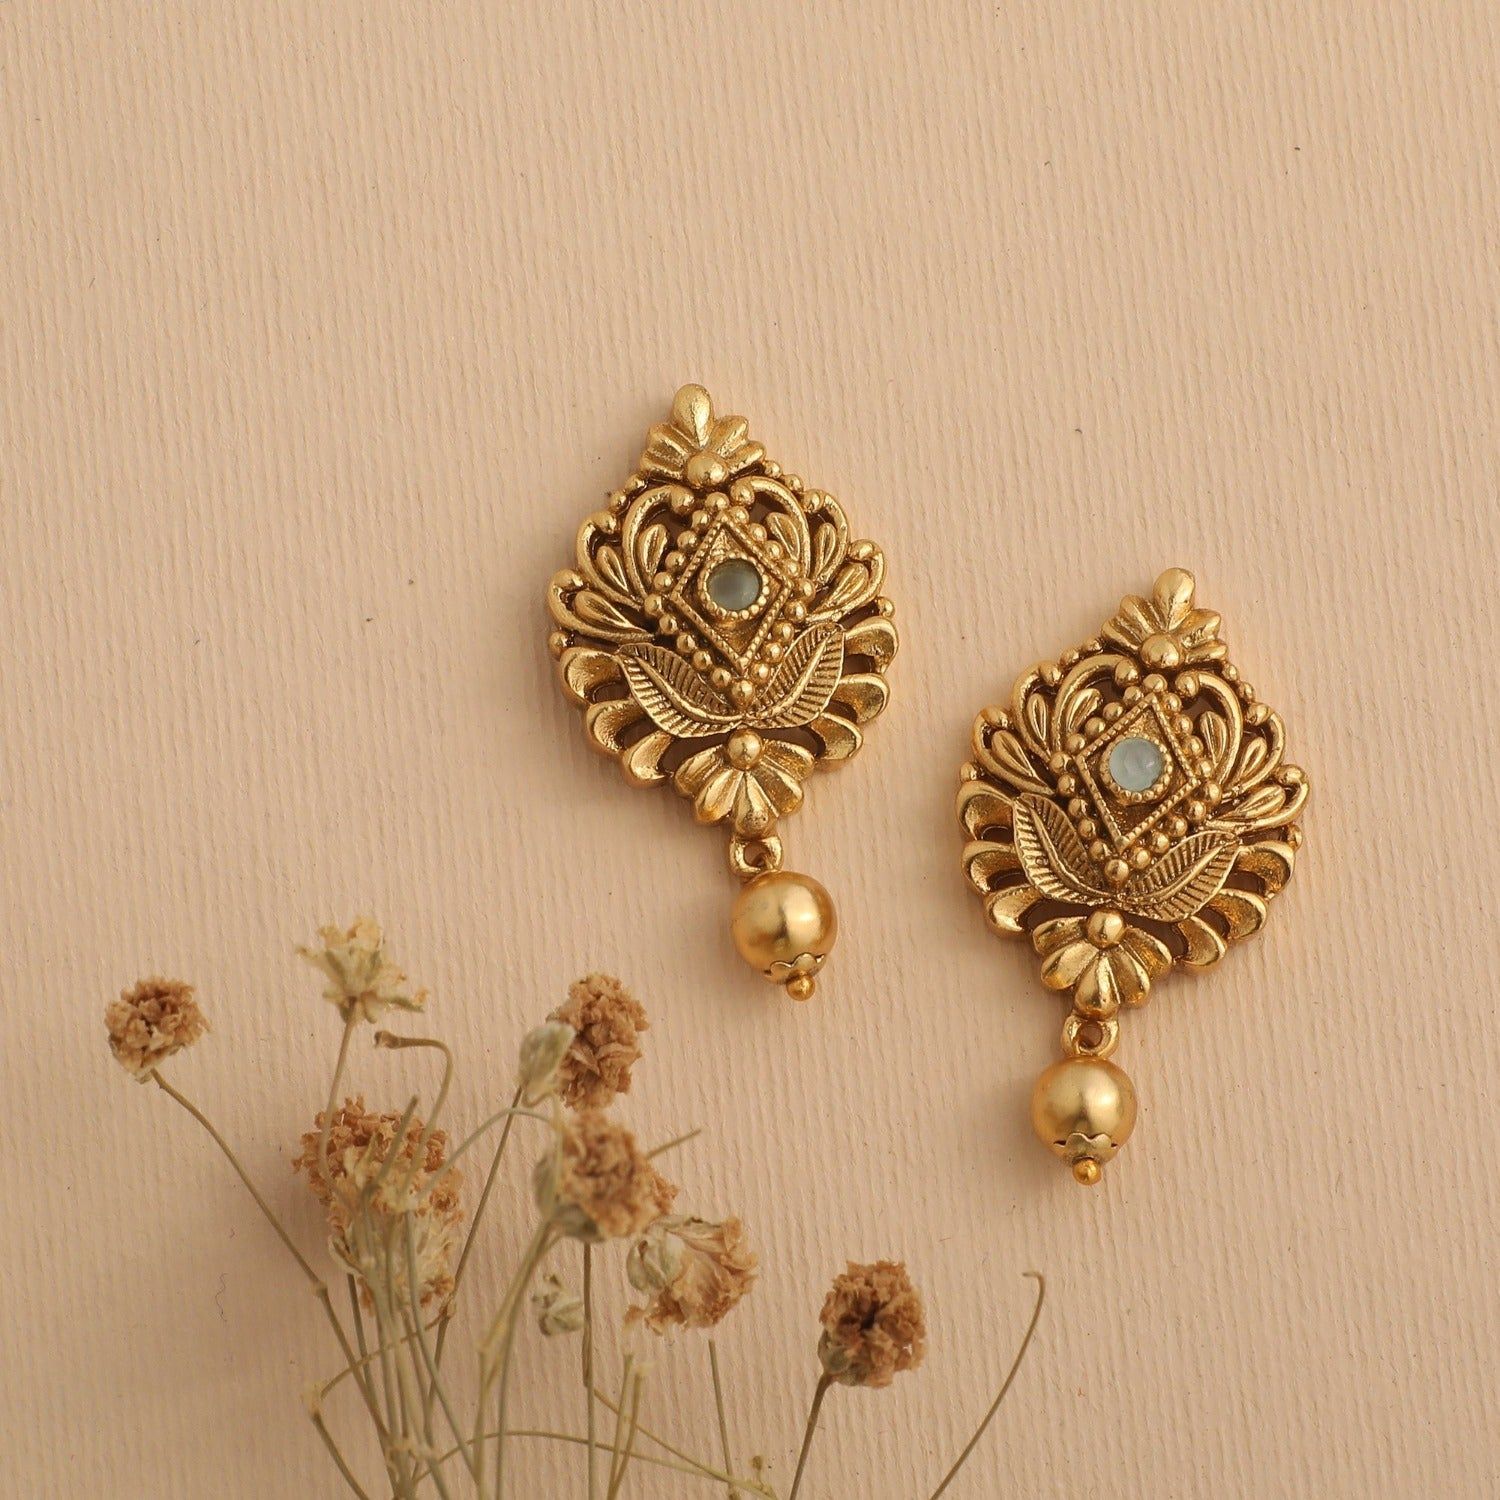 Gold Earrings Designs: Add Elegance to Your Look with Stunning Gold Earrings Designs